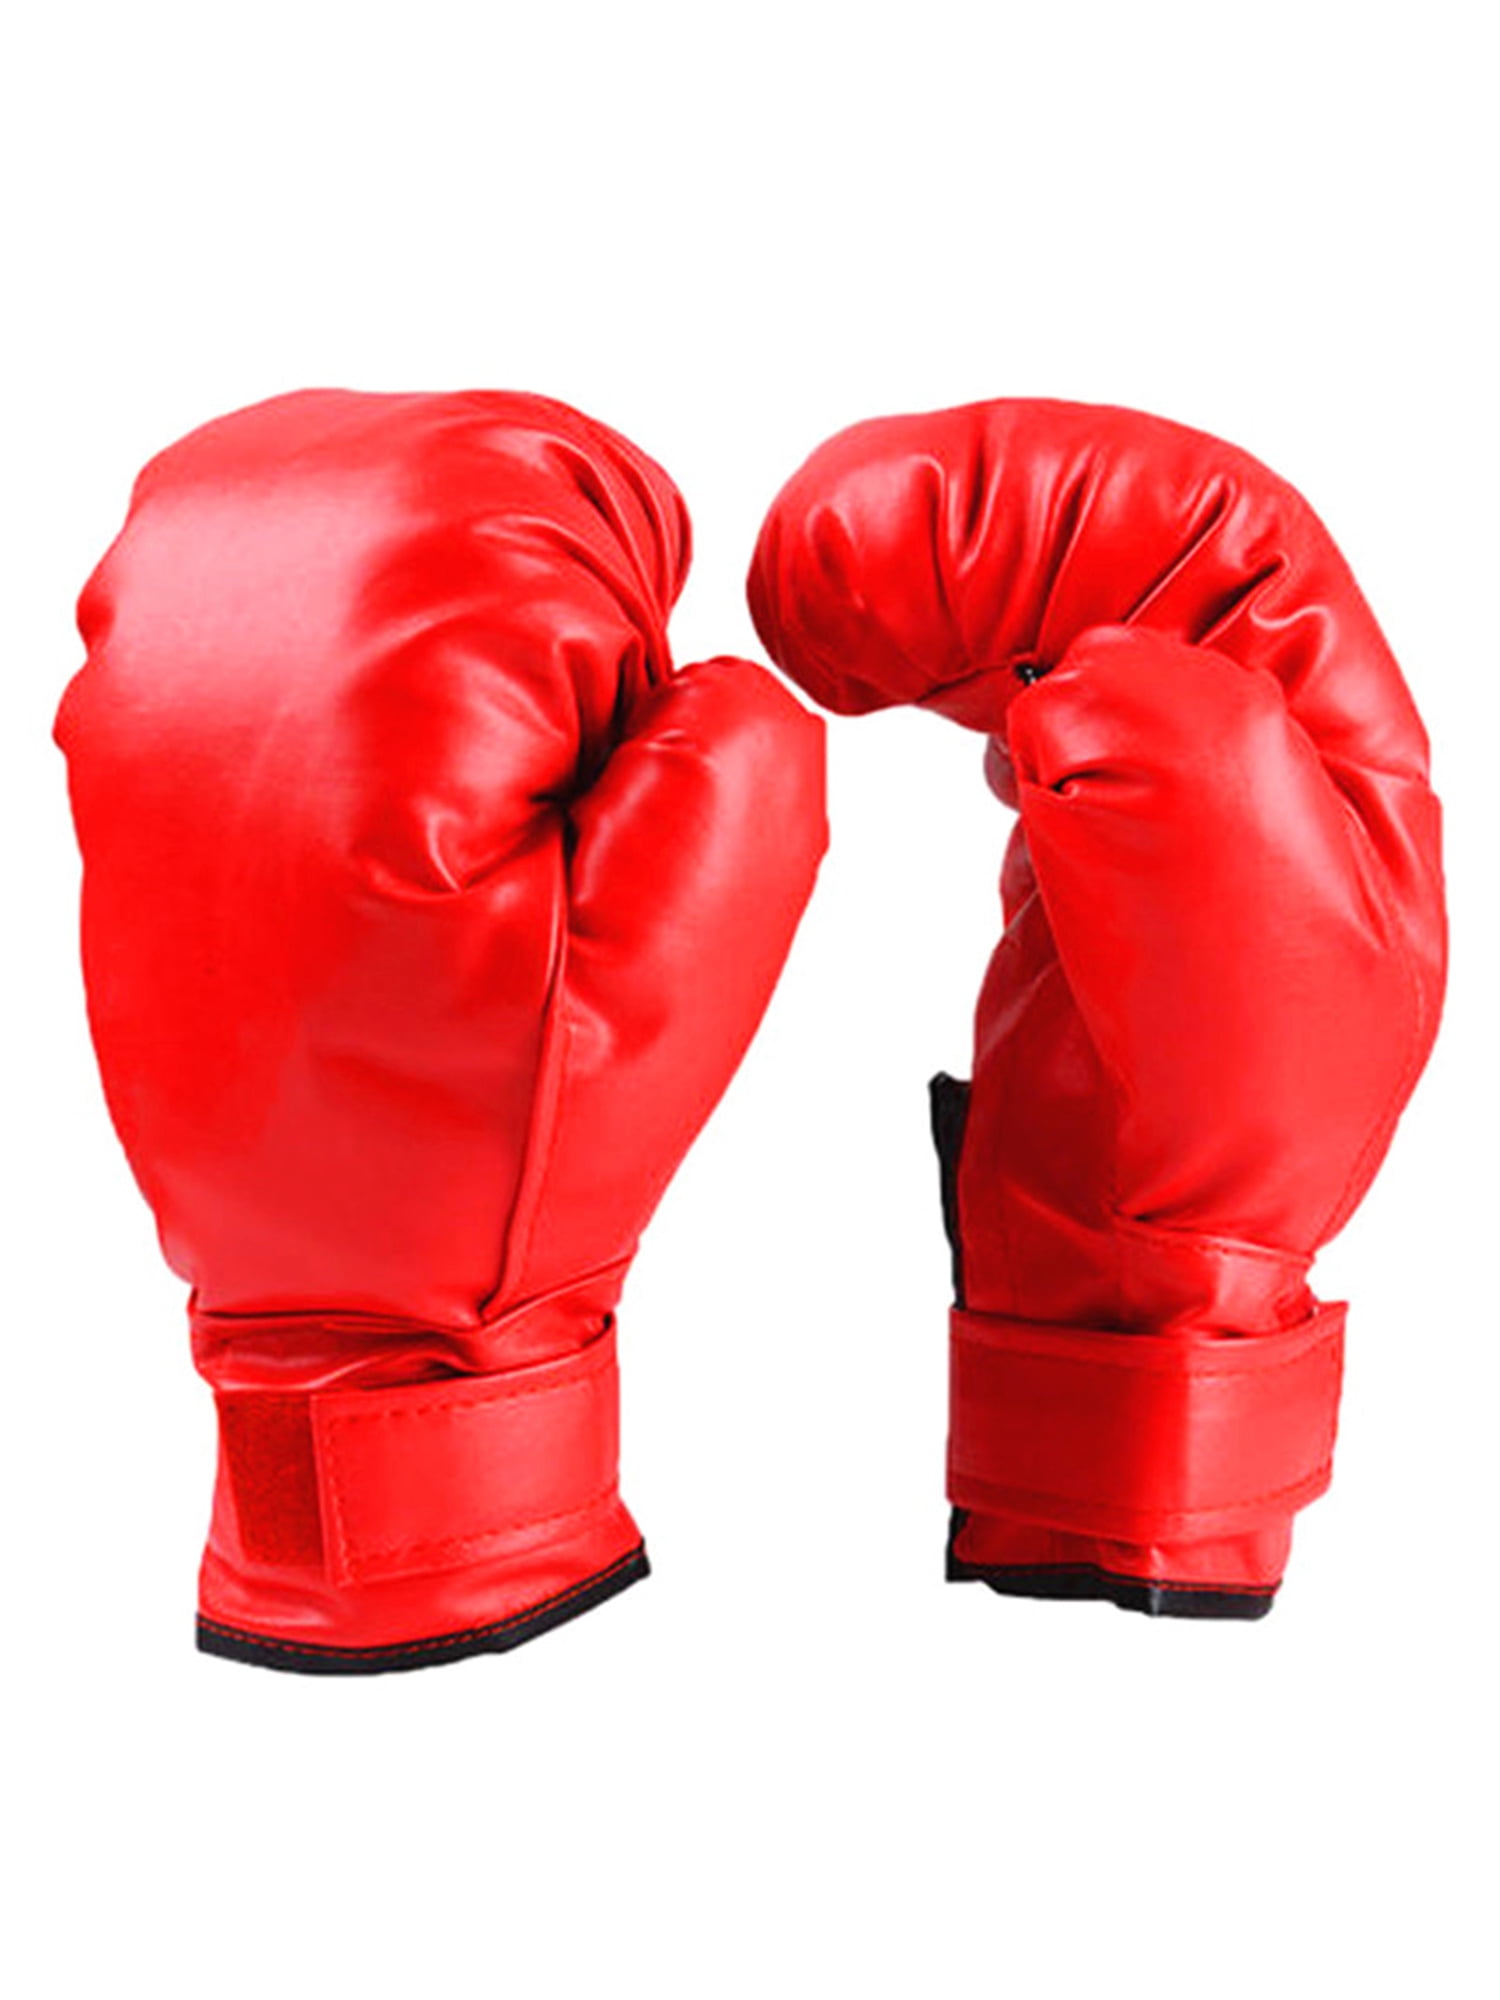 Details about   1 Pair PU Leather Boxing Gloves Fighting Training Sparring Dual Punching Gloves 